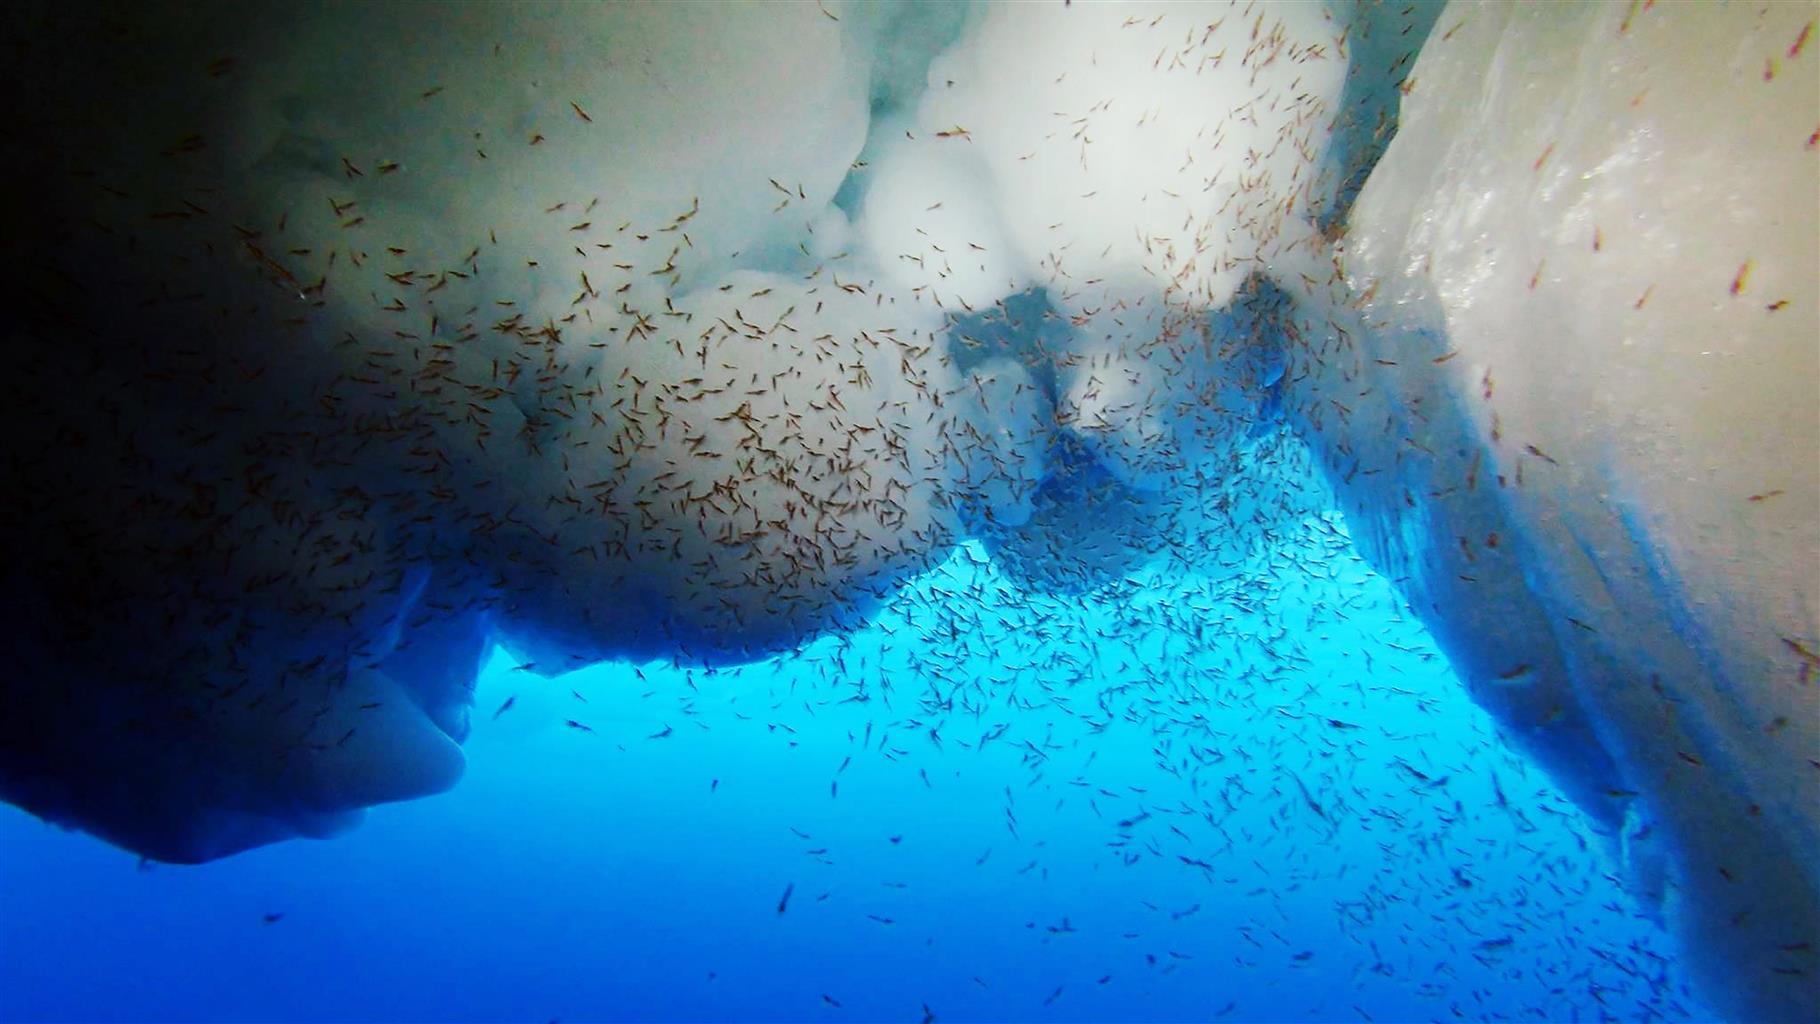 Antarctic krill feed and breed beneath sea ice in the Southern Ocean. Climate change is affecting life in these waters, including krill, the keystone species in the regional food web.